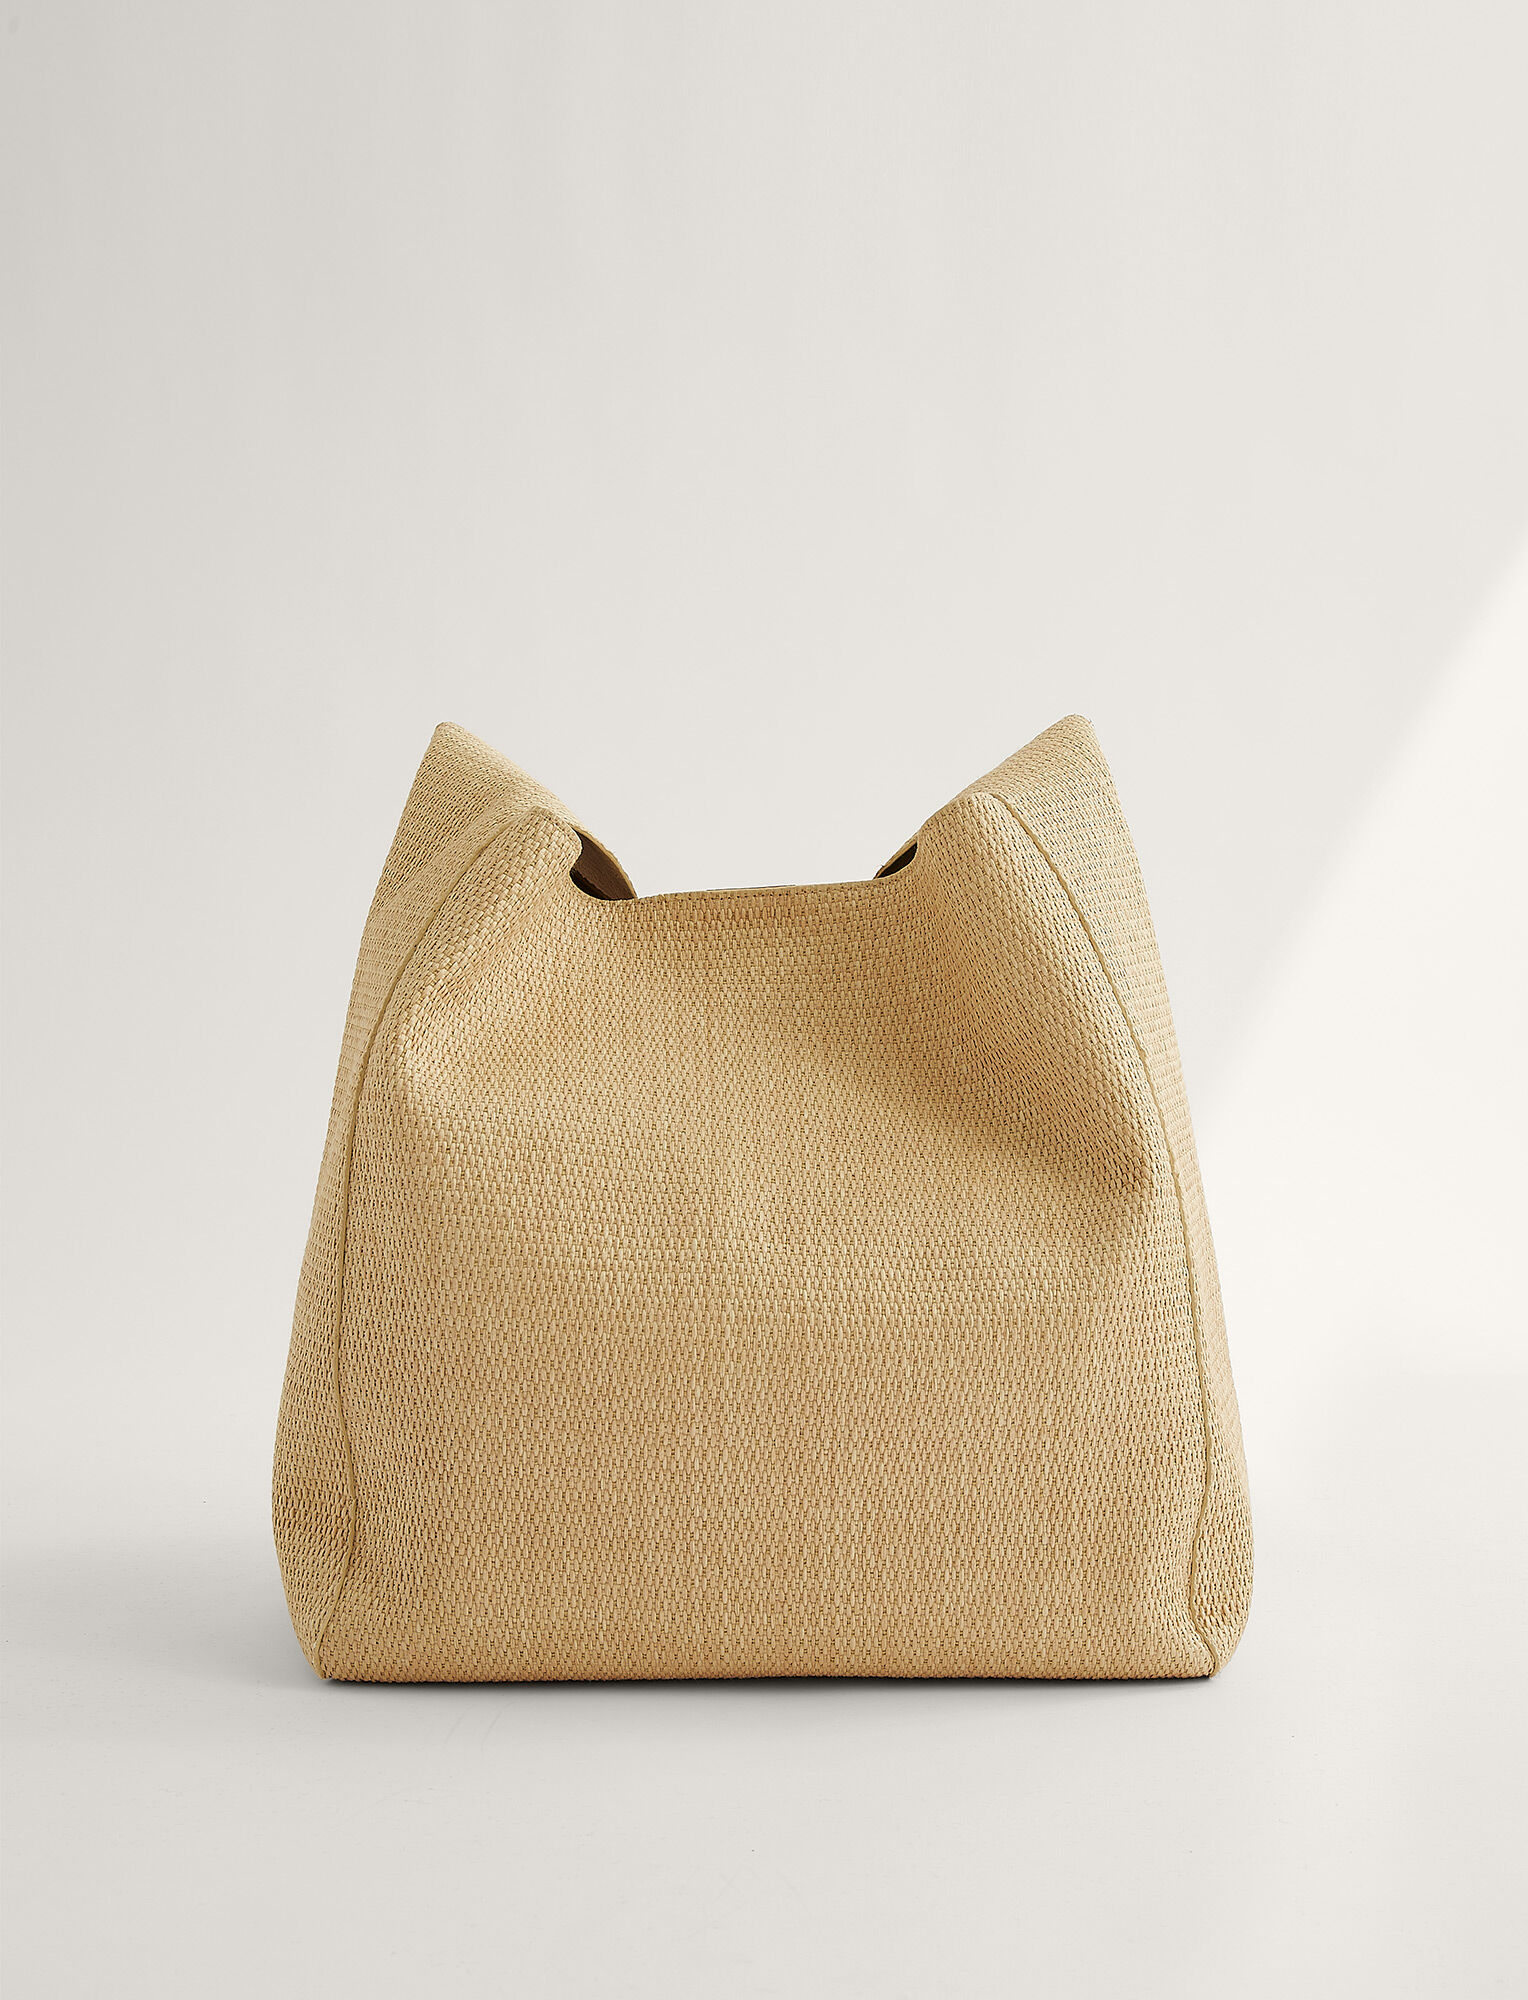 Joseph, Natural Fabric Slouch Bag, in NATURAL